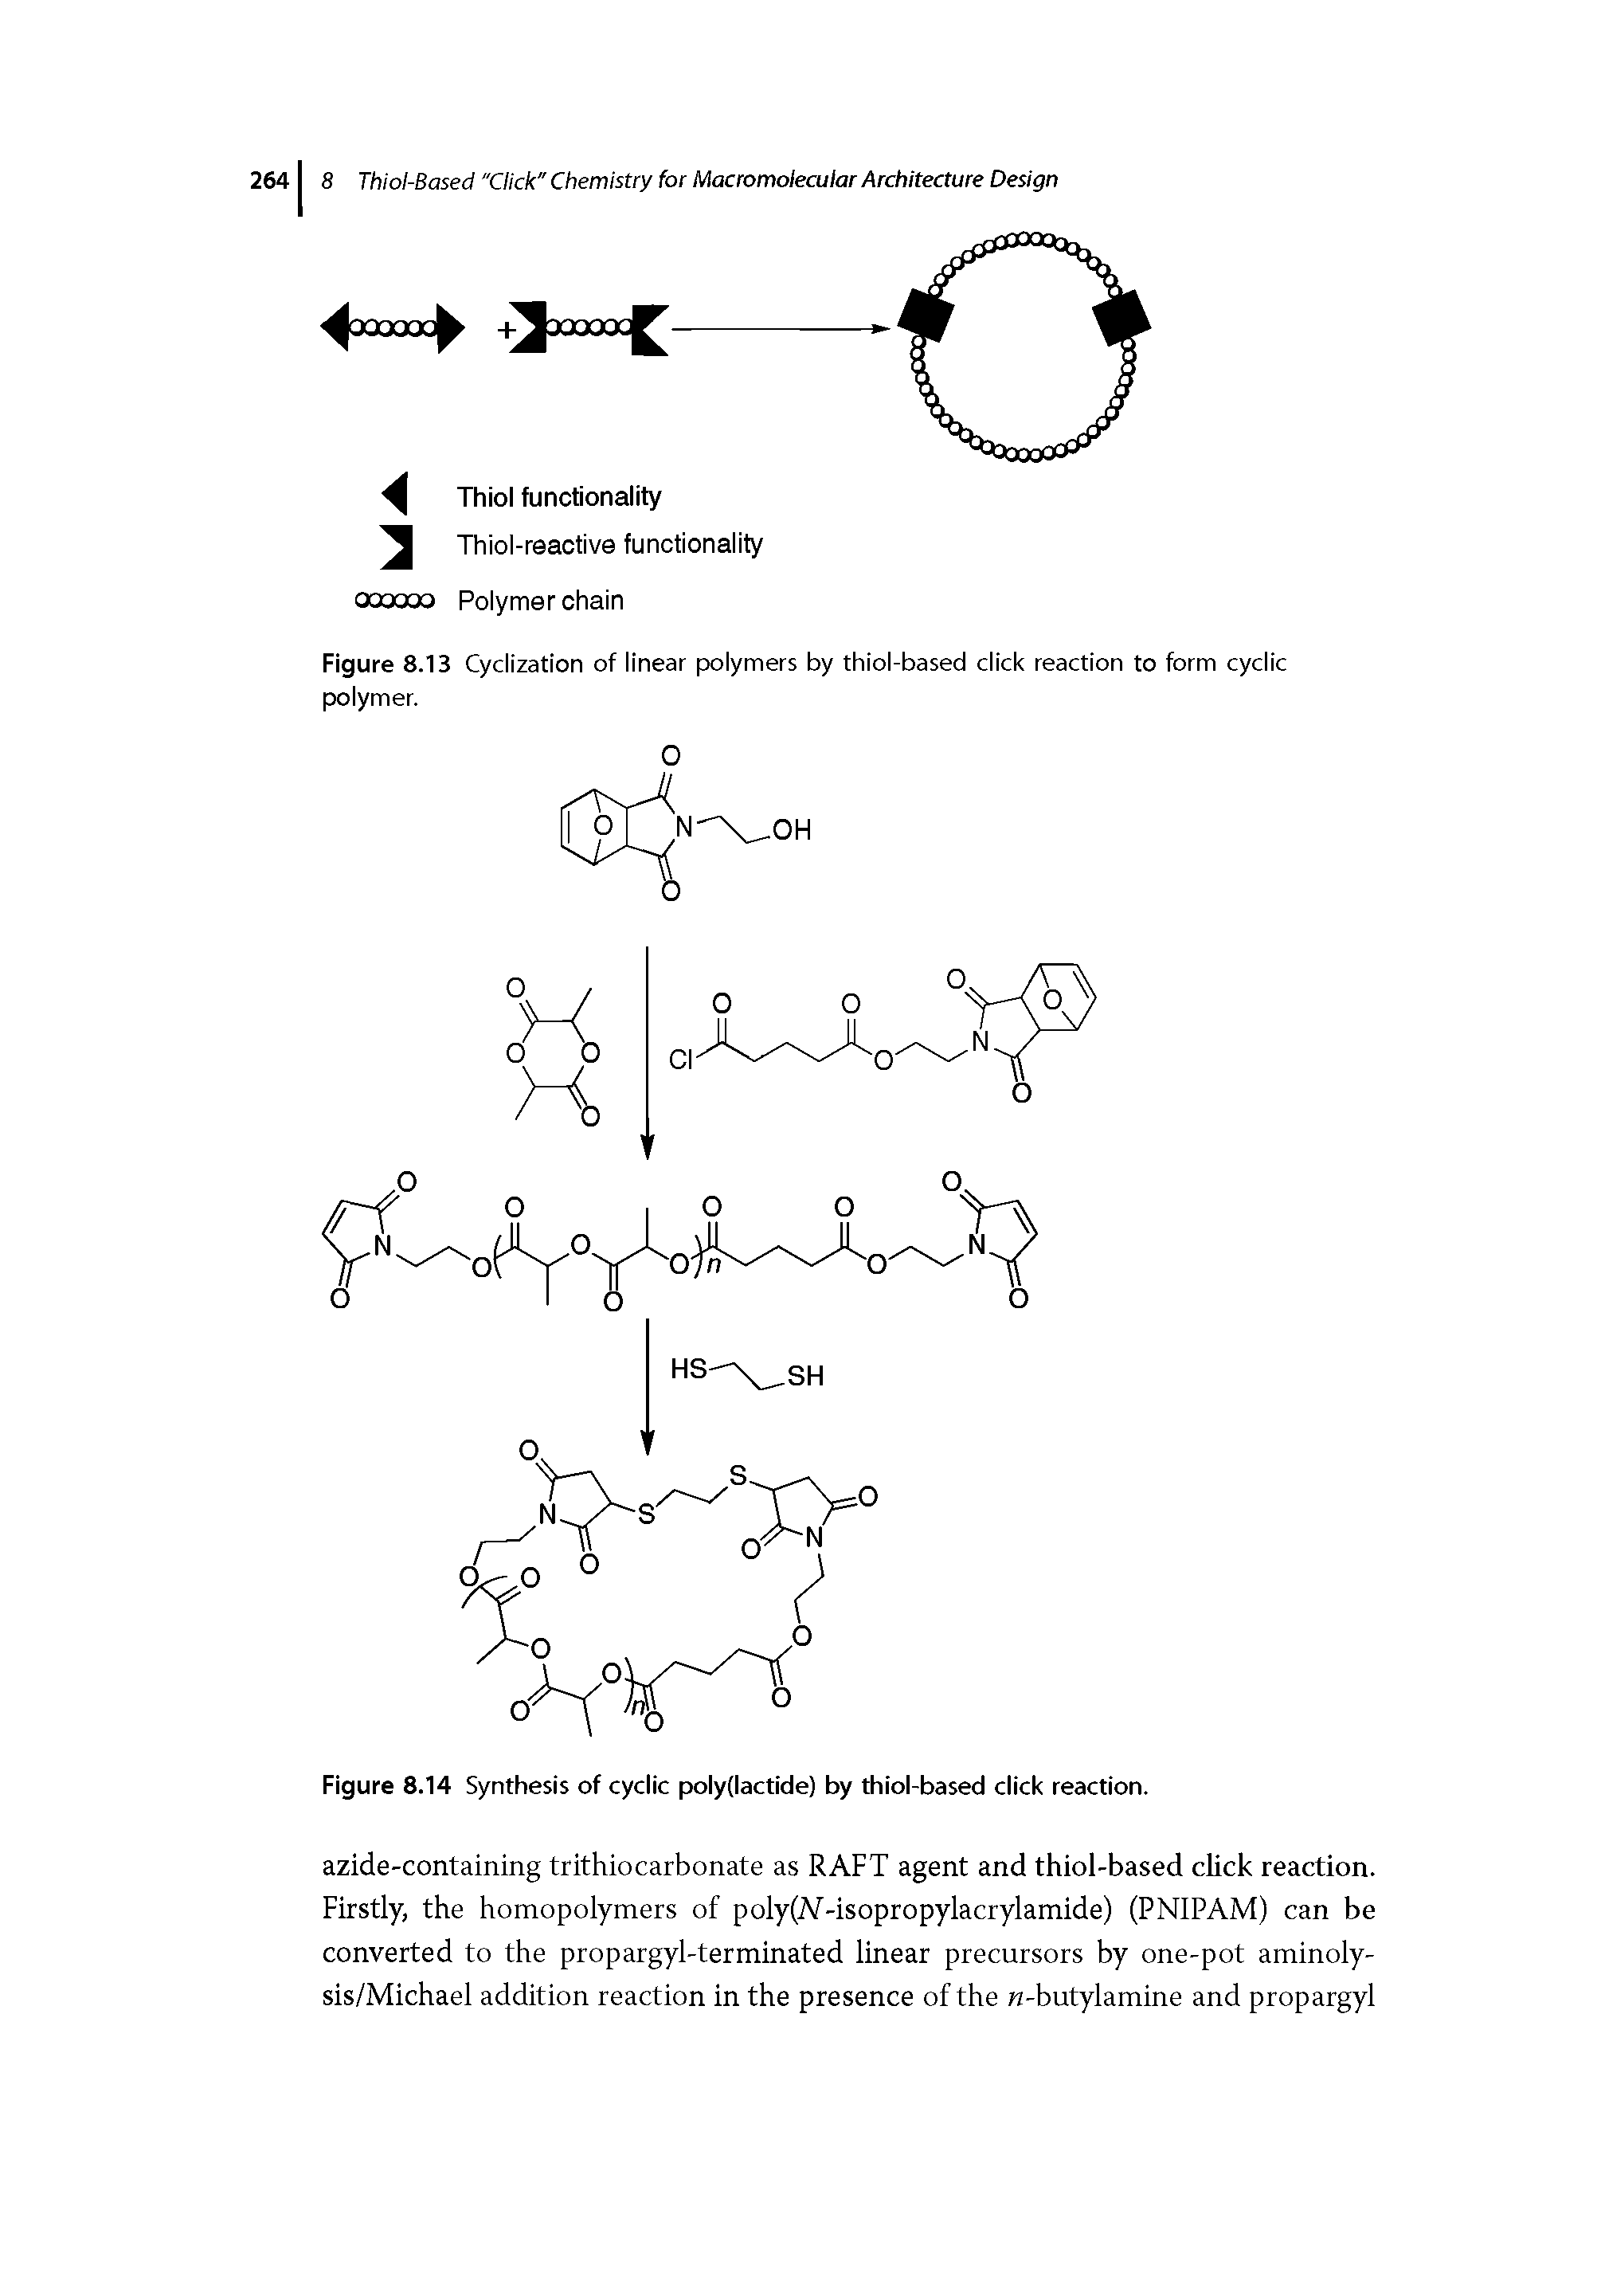 Figure 8.13 Cyclization of linear polymers by thiol-based click reaction to form cyclic polymer.